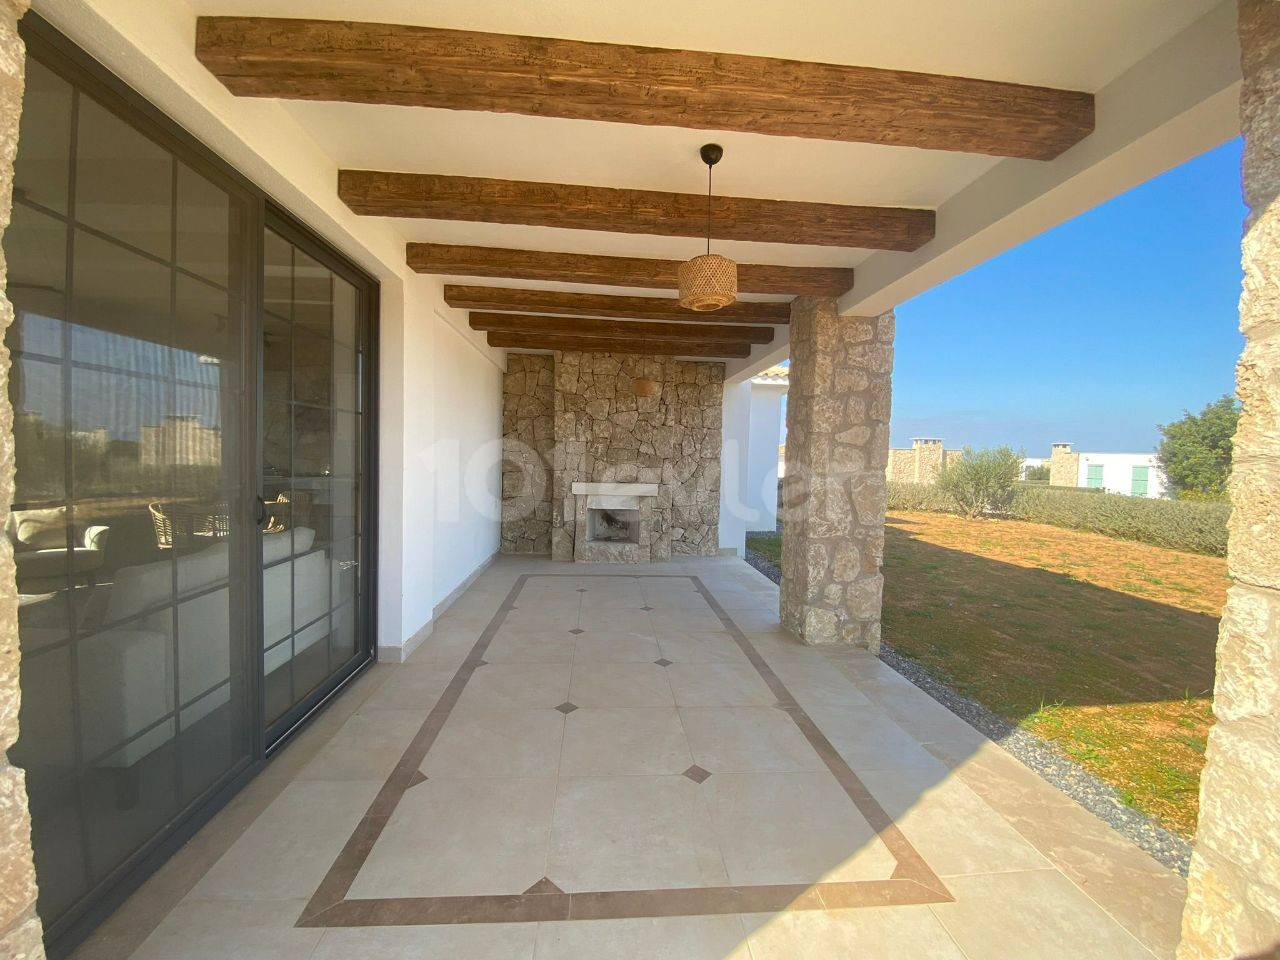 Cyprus - Iskele - A Delightful 3+1 Villa Into Dipkarpaz That Will Warm Your Heart With Nature